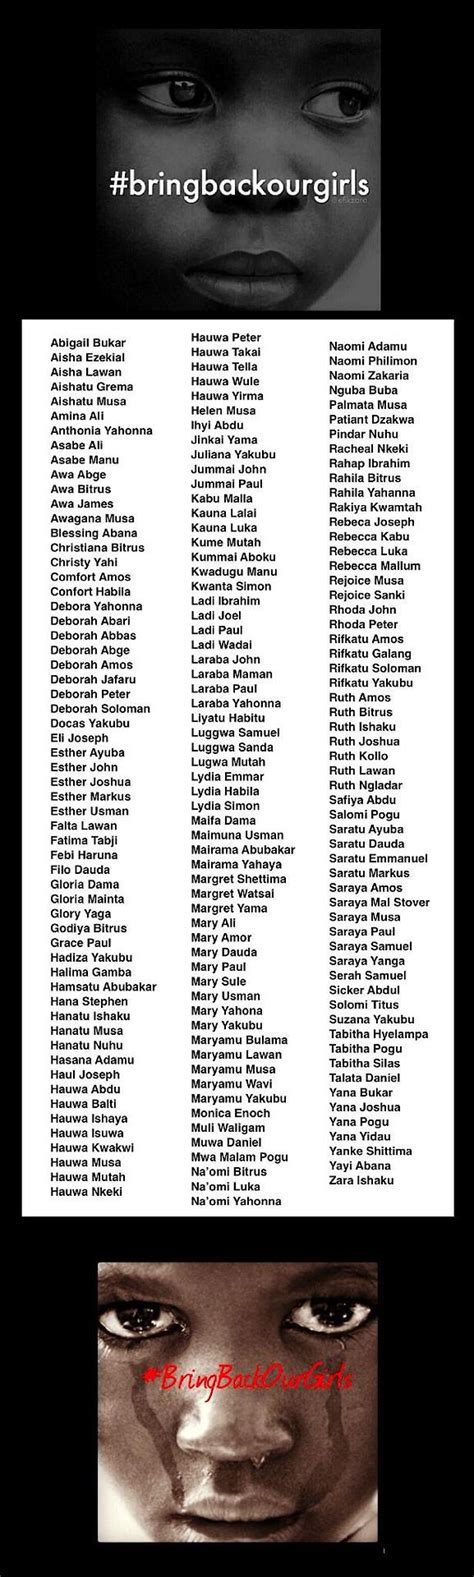 These Are The Names Of The 180 Still Missing Nigerian Girls Bring Back Our Girls Nigerian